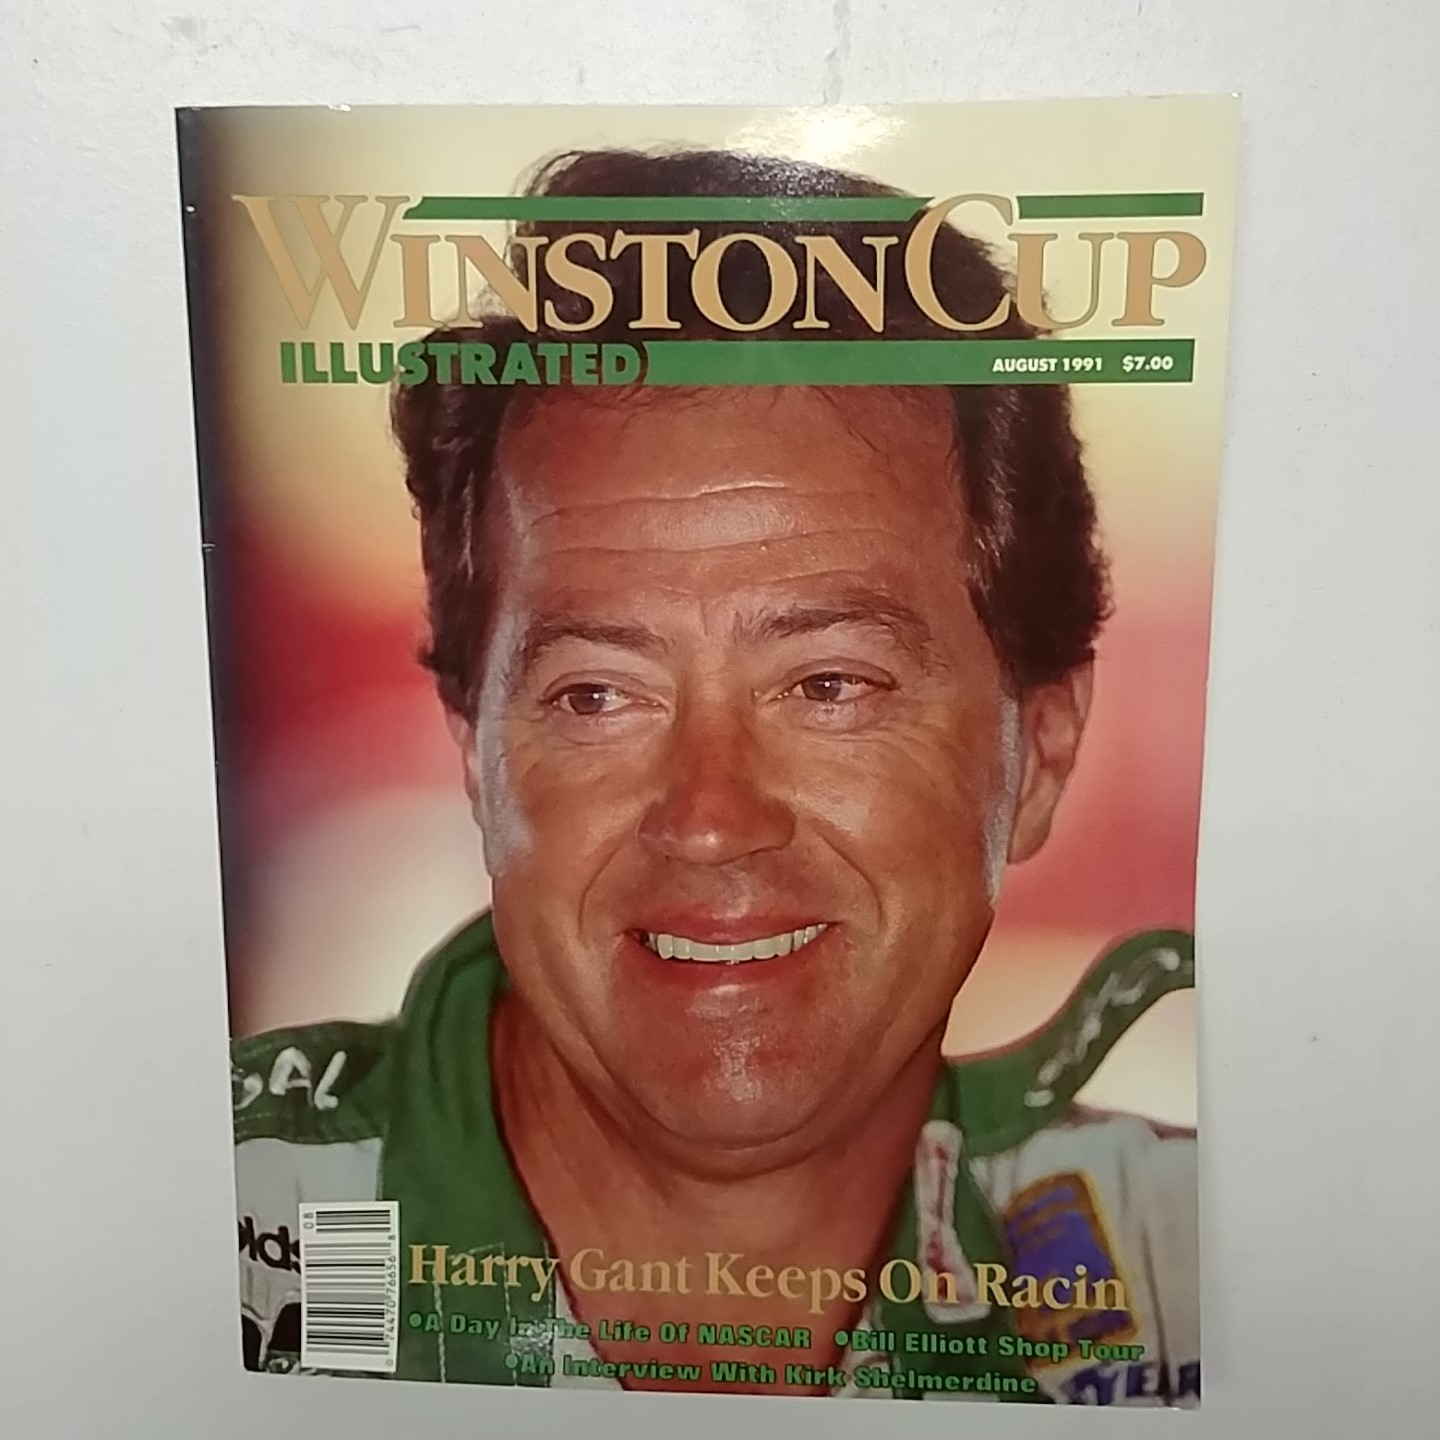 1991 Winston Cup Illustrated August